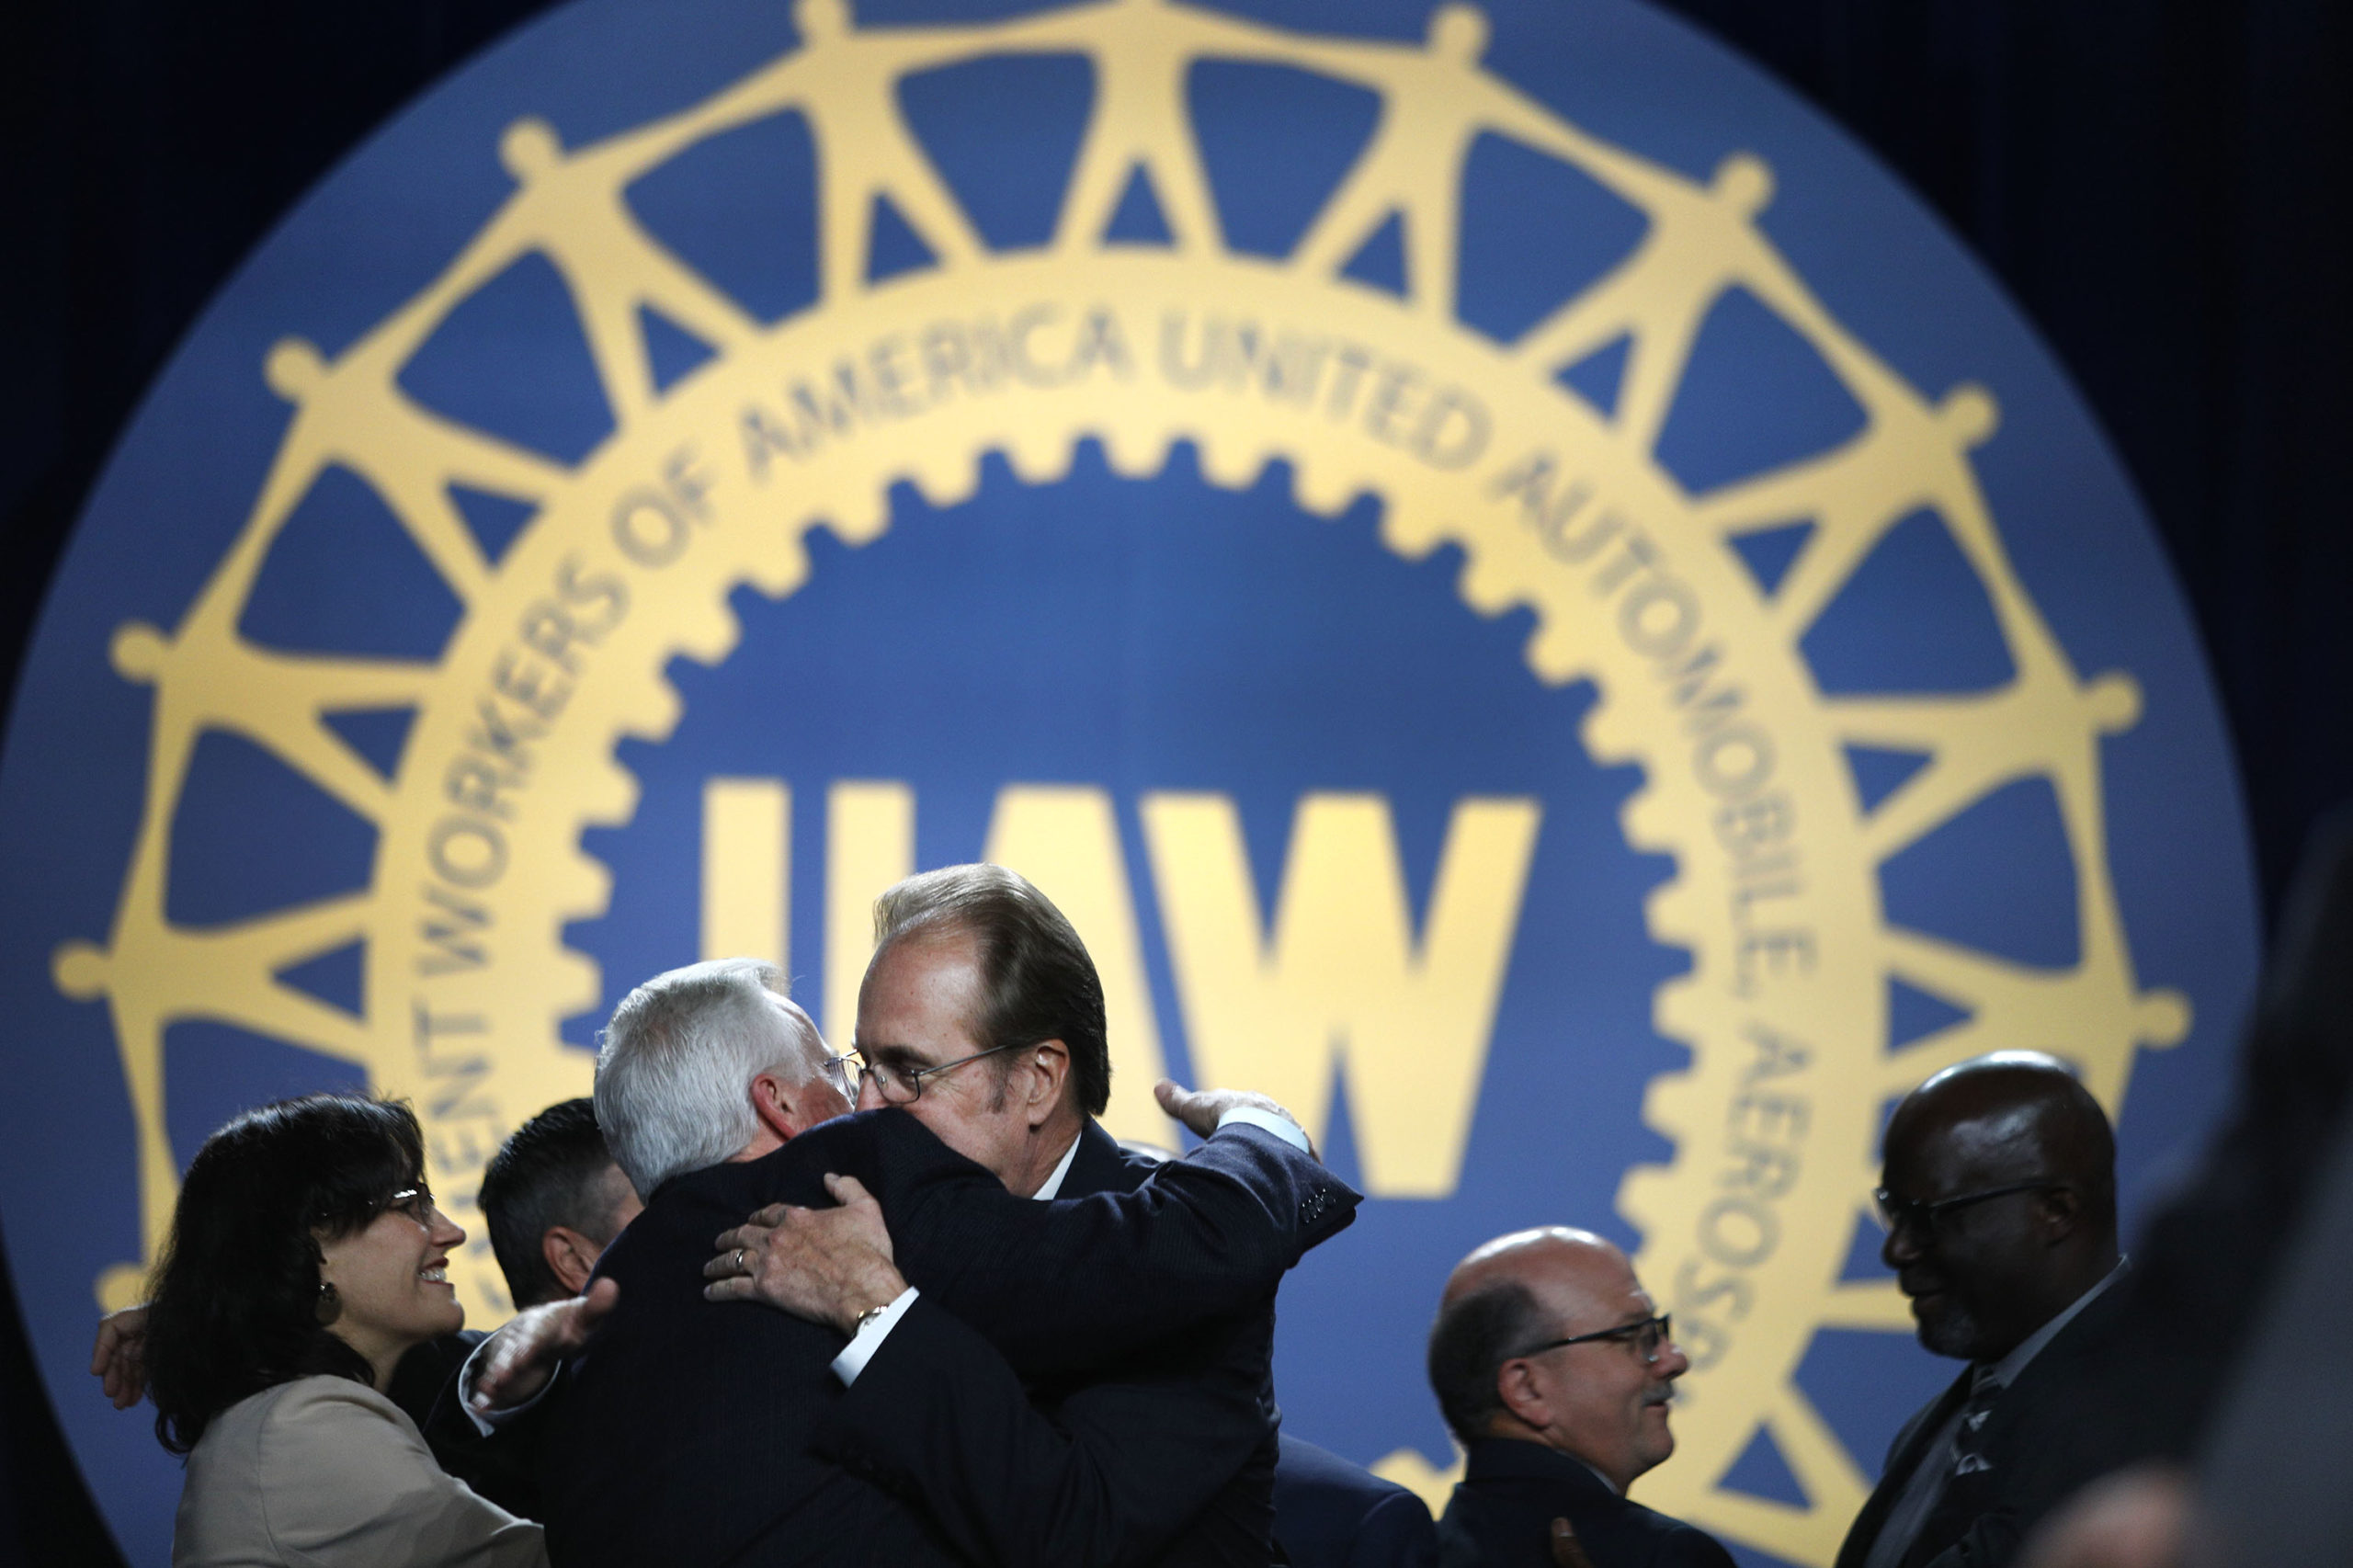 Former UAW presidents Gary Jones and Dennis Williams embrace on stage at the 37th UAW Constitutional Convention in 2018. (Bill Pugliano/Getty Images)